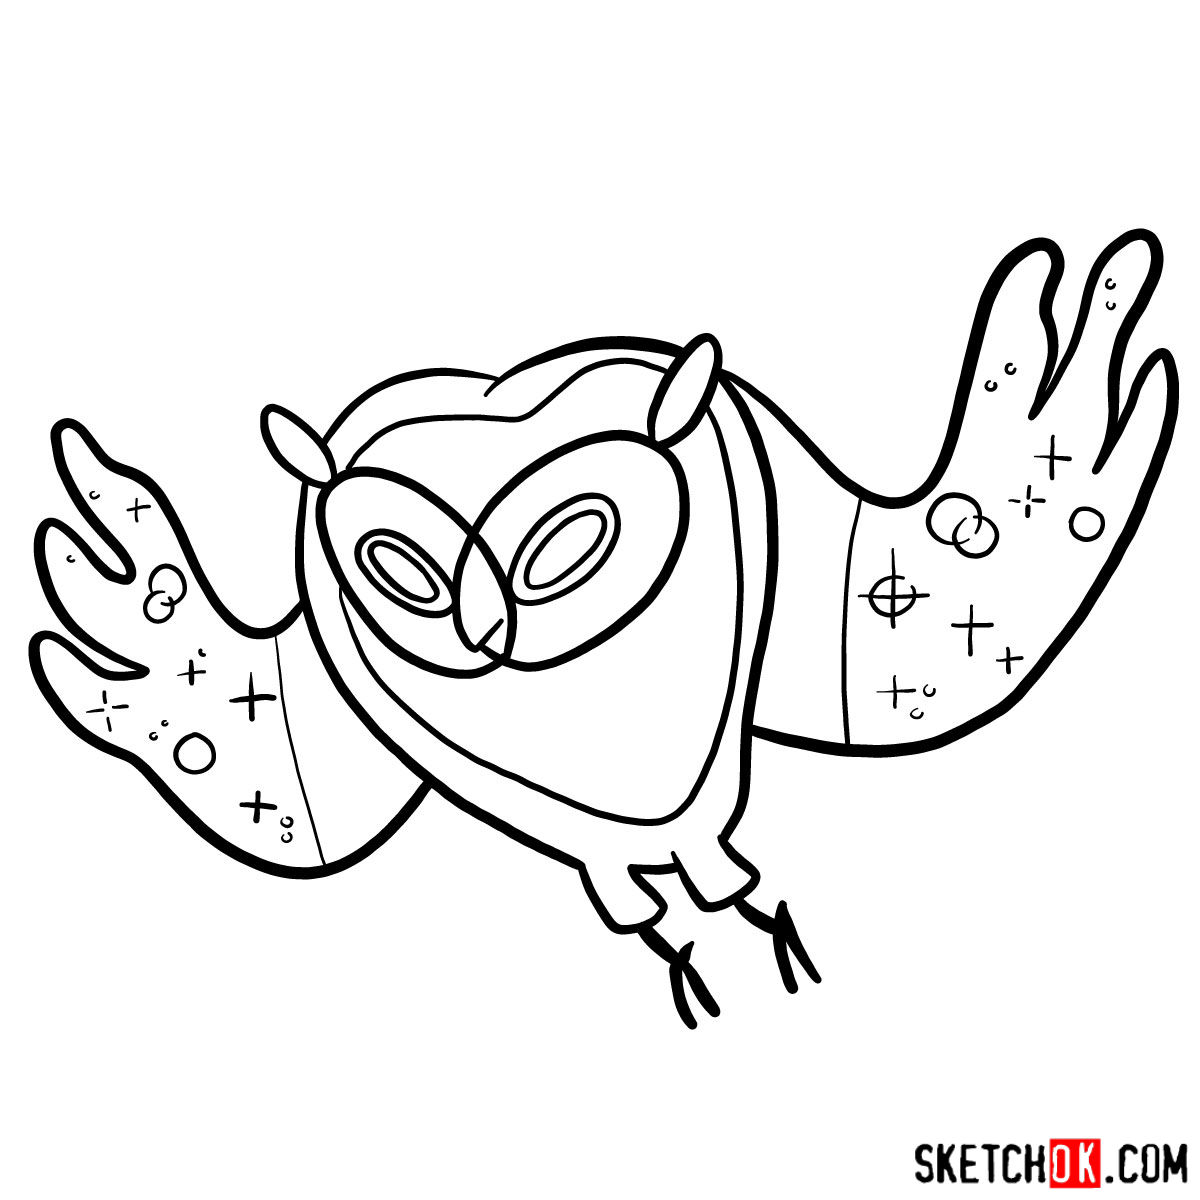 The Cosmic Owl coloring page – Free Printable PDF